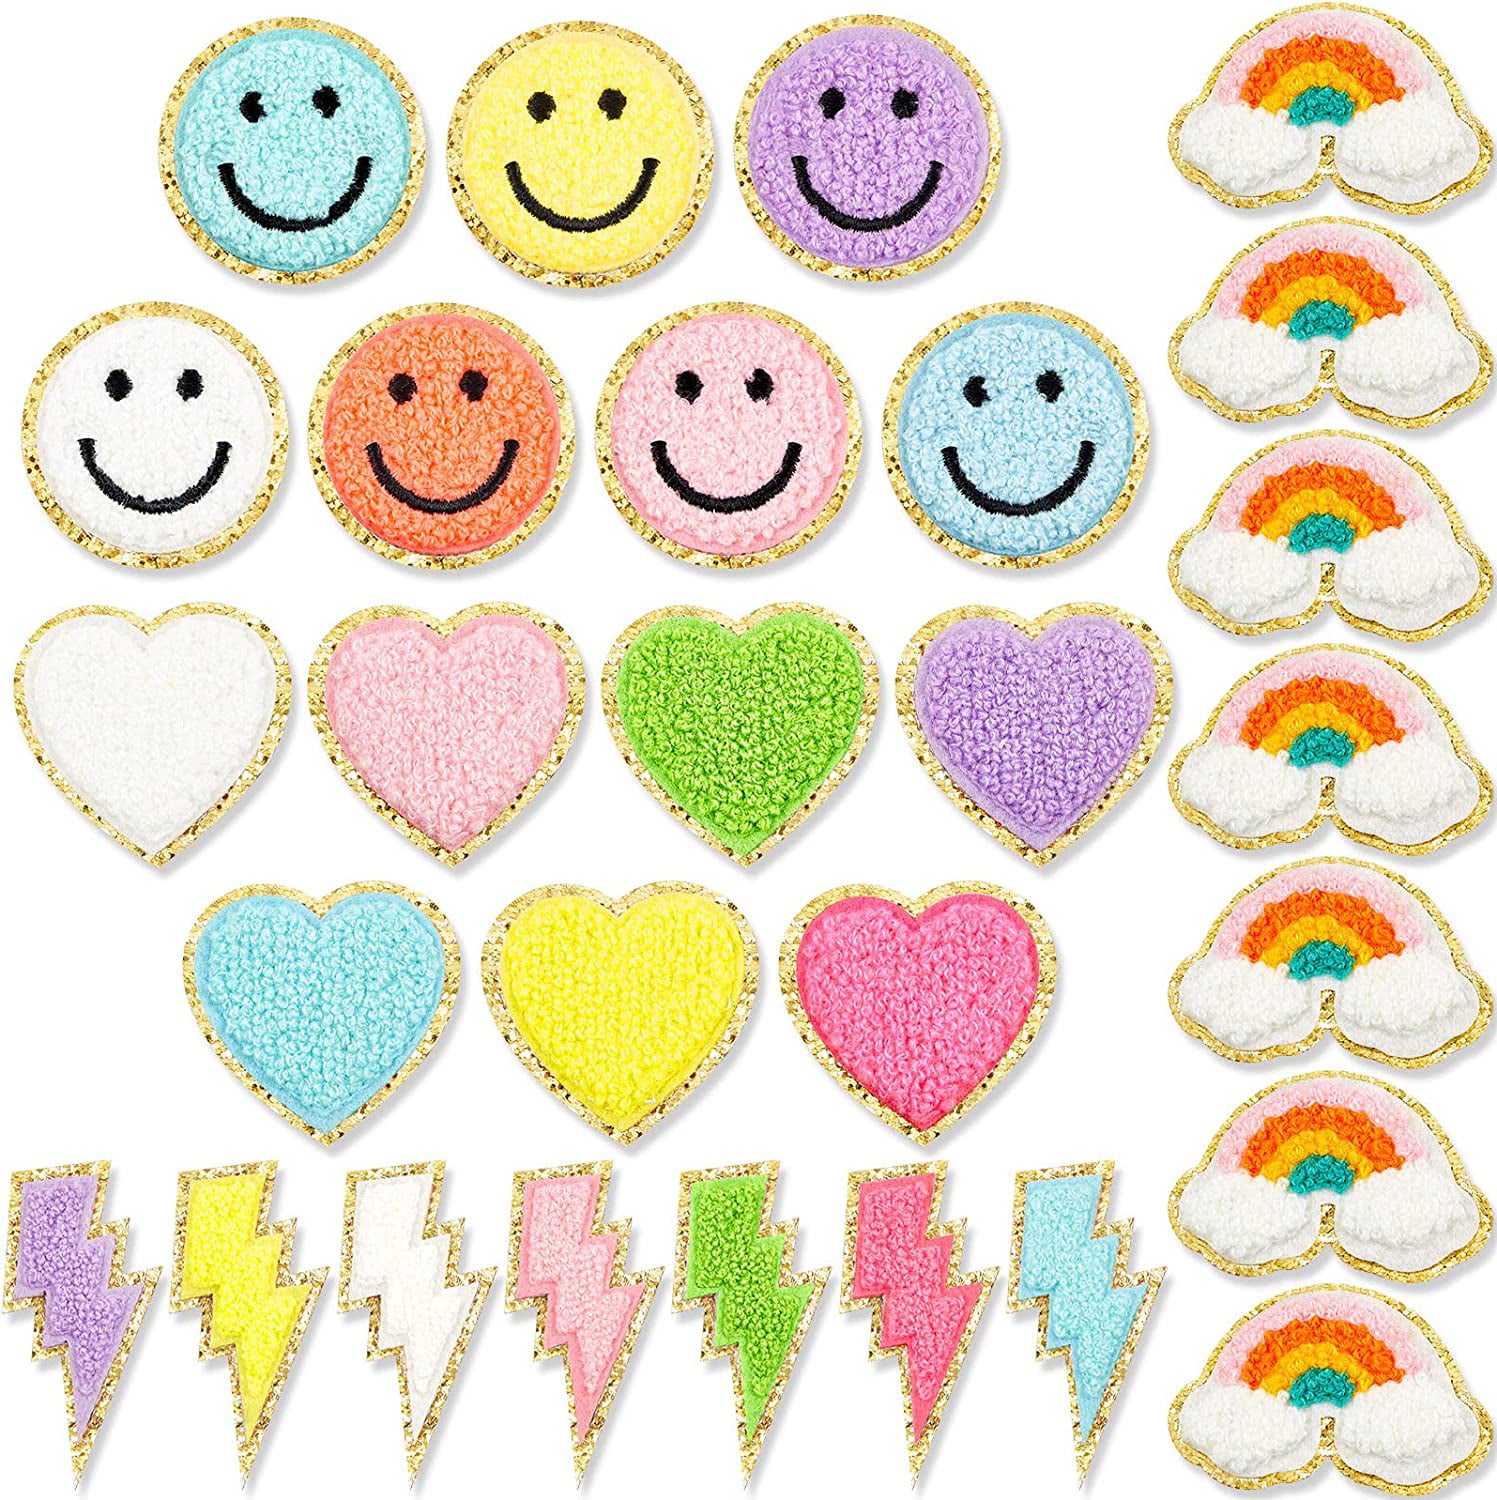 Happy Face 24 Pcs Smile Face Heart Patch Cute Iron on Patches Decorative Dress Heart Applique Multicolor DIY Adhesive Embroidery Patches Smiling Face Love Chenille Patch for Clothes Sewing 